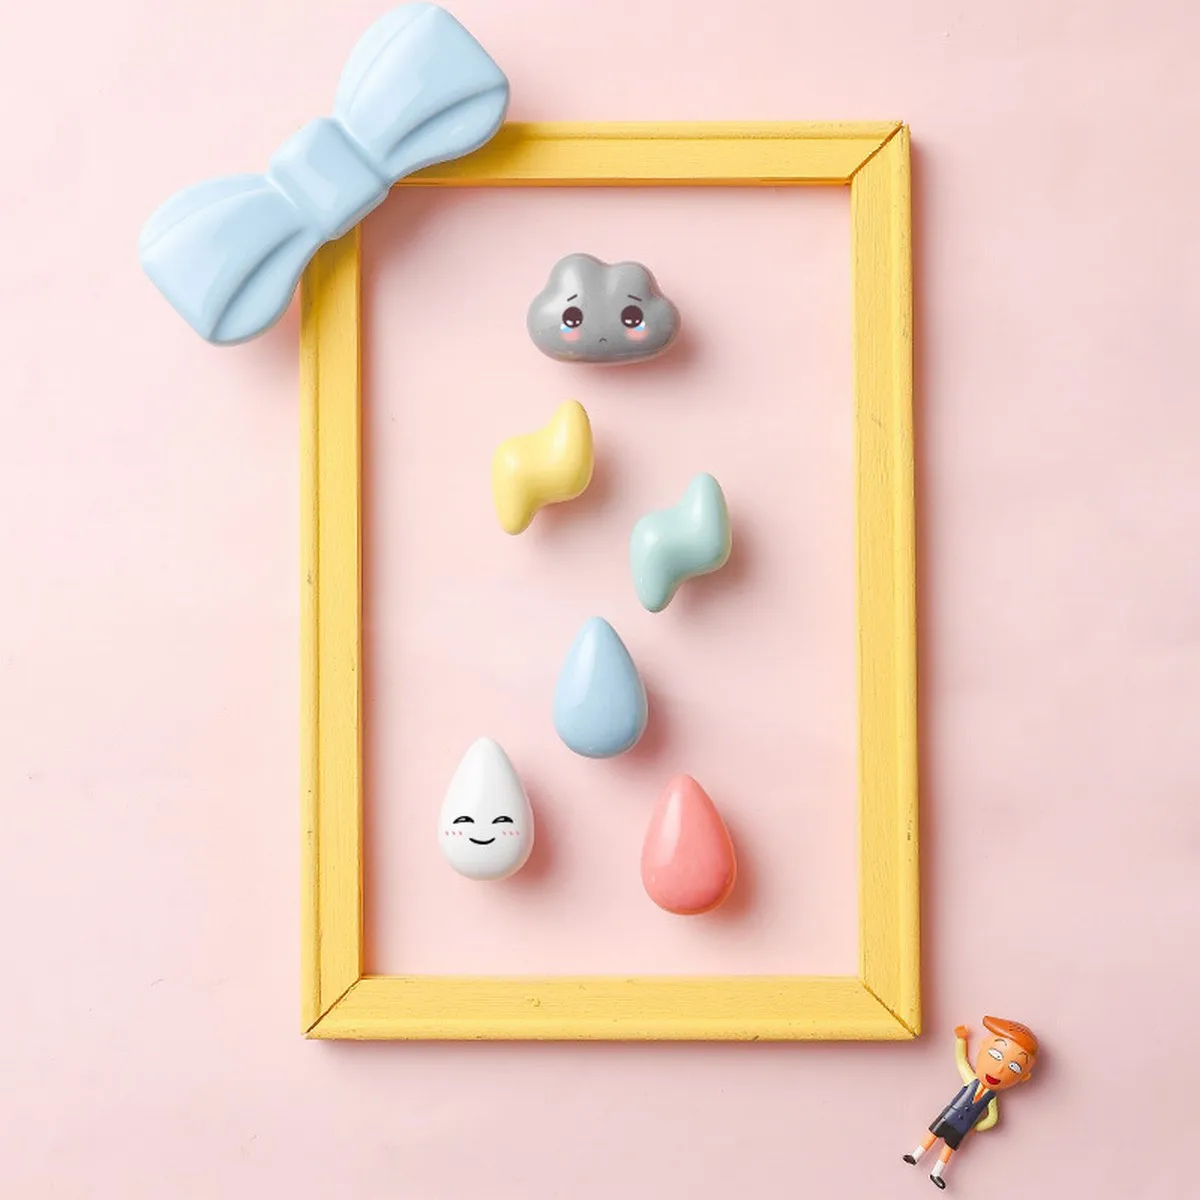 

Rain Lovely Ceramics Cartoon Kids Room Furniture Handles For Cabinets And Drawers Child Door Baby Cupboards Single Hole